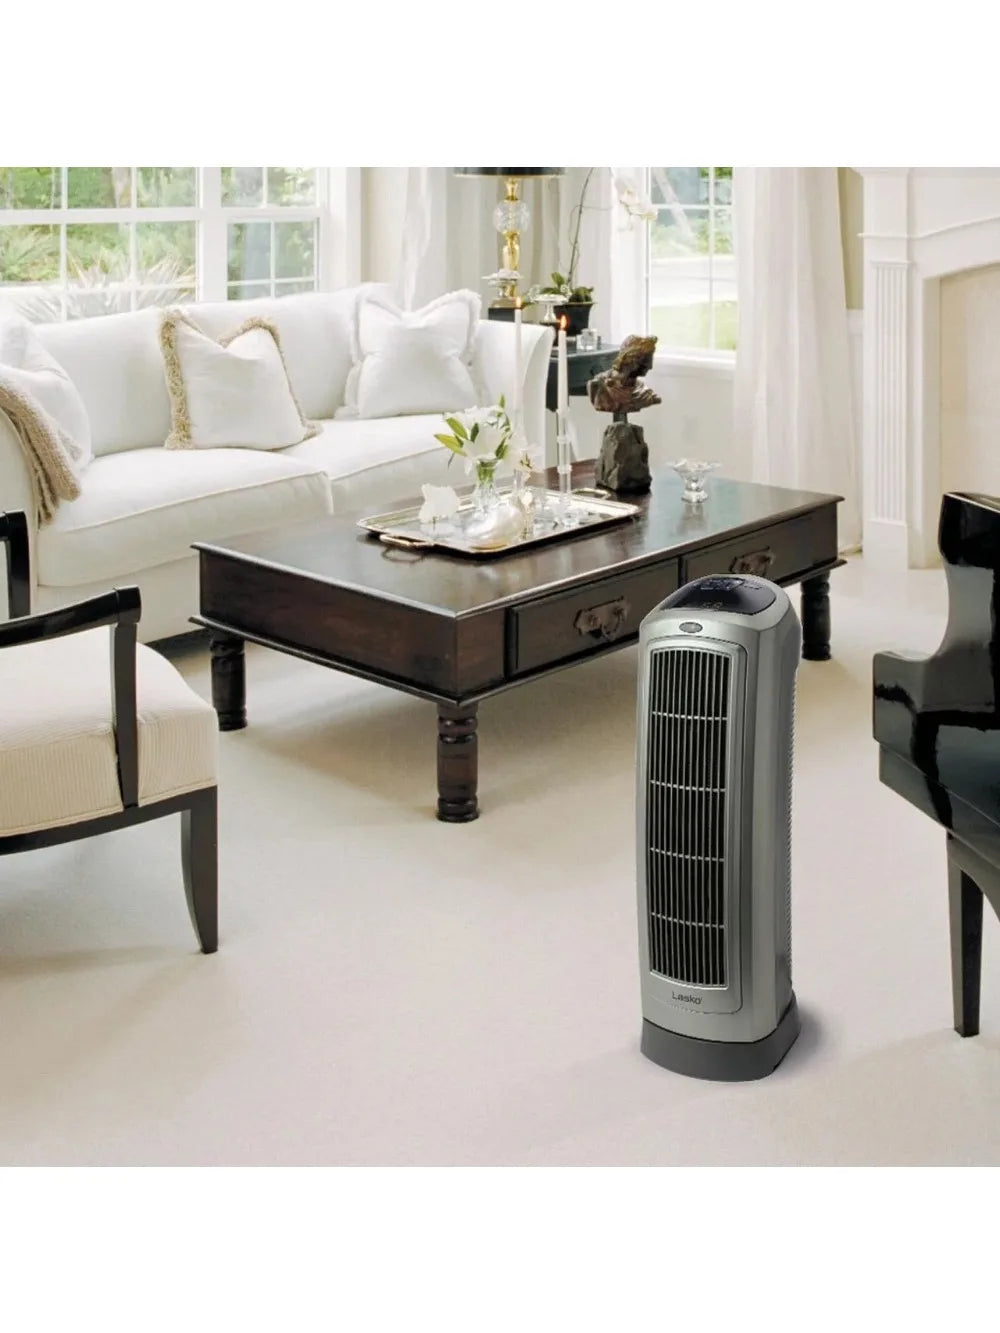 Electric Tower Space Heater with Remote Control